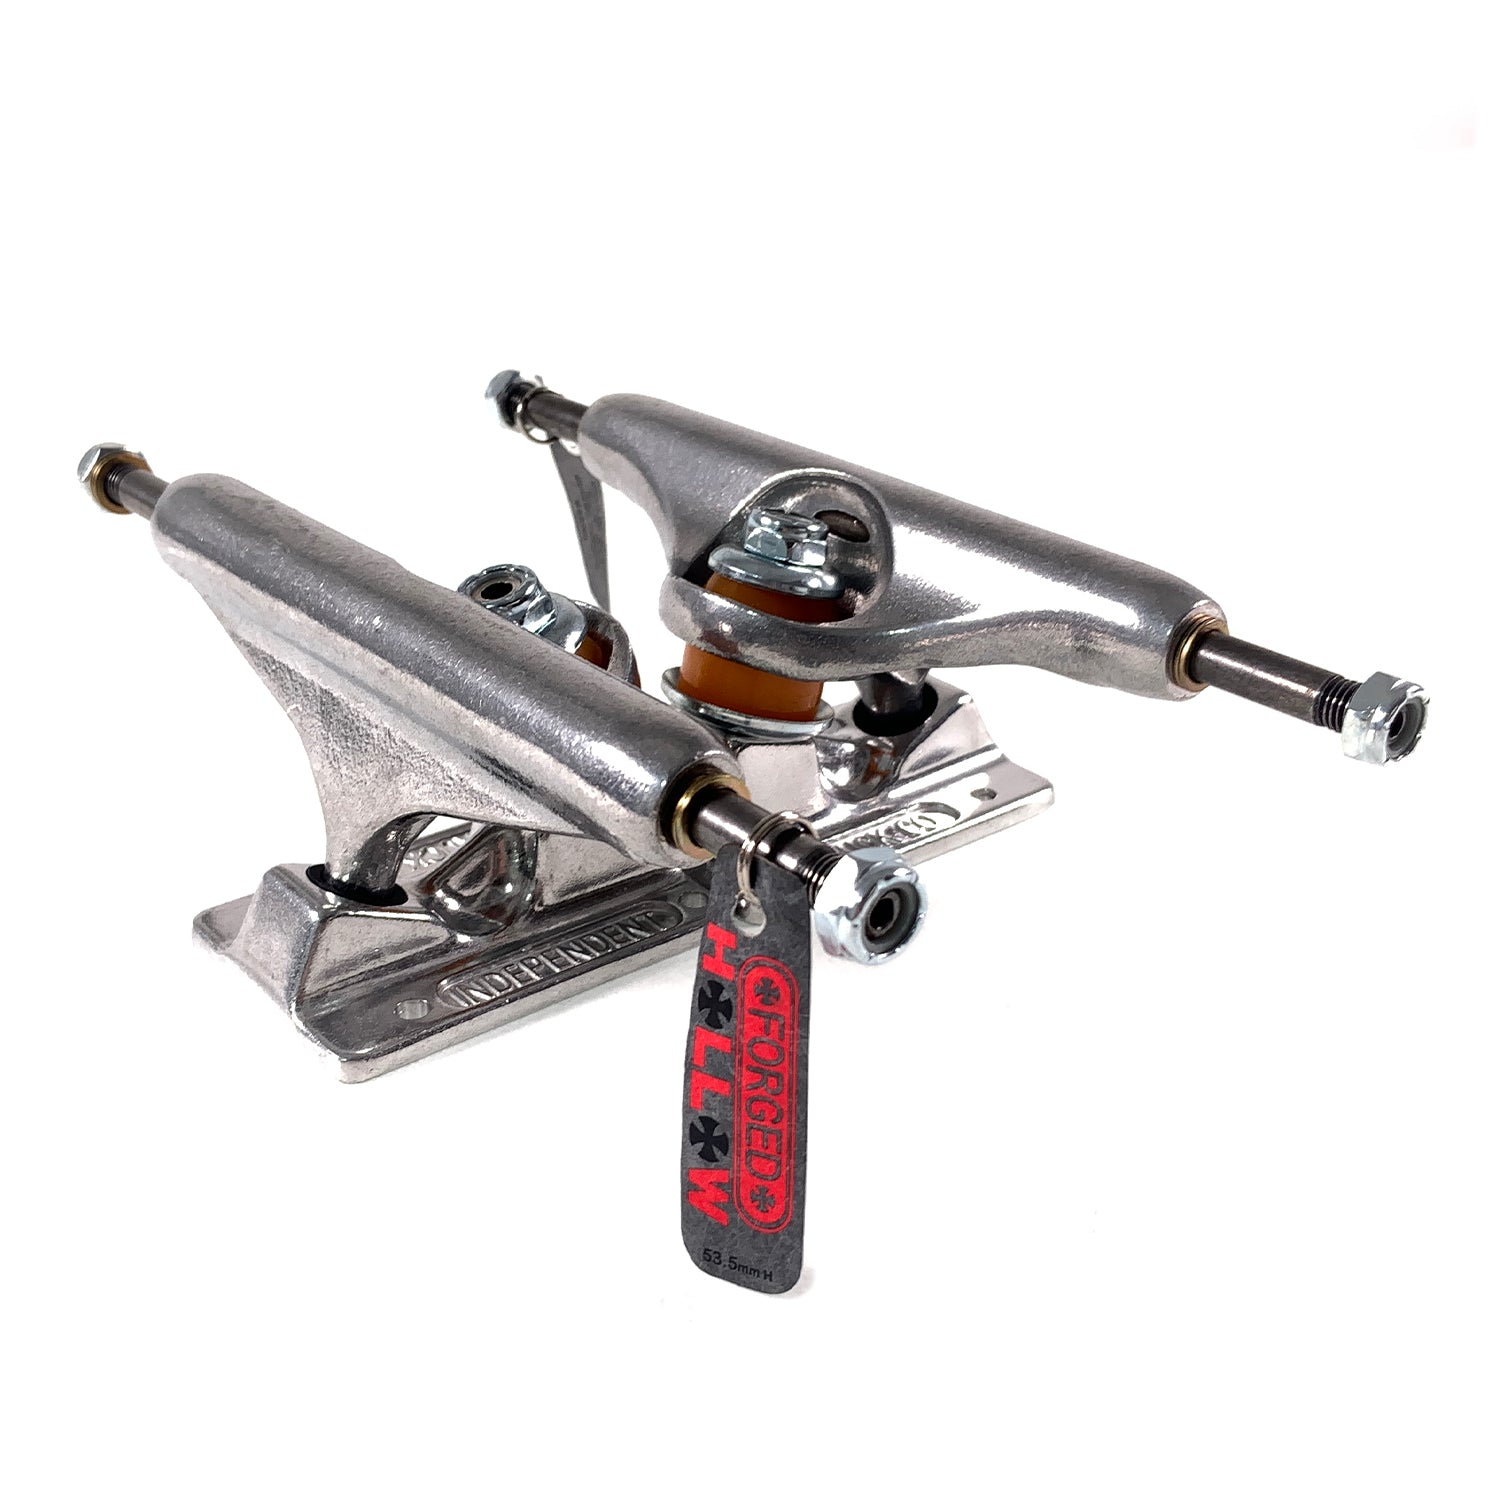 Independent Stage 11 Hollow Forged Standard Truck 139 (8") - Silver (x 2 / Sold as a pair) - Prime Delux Store